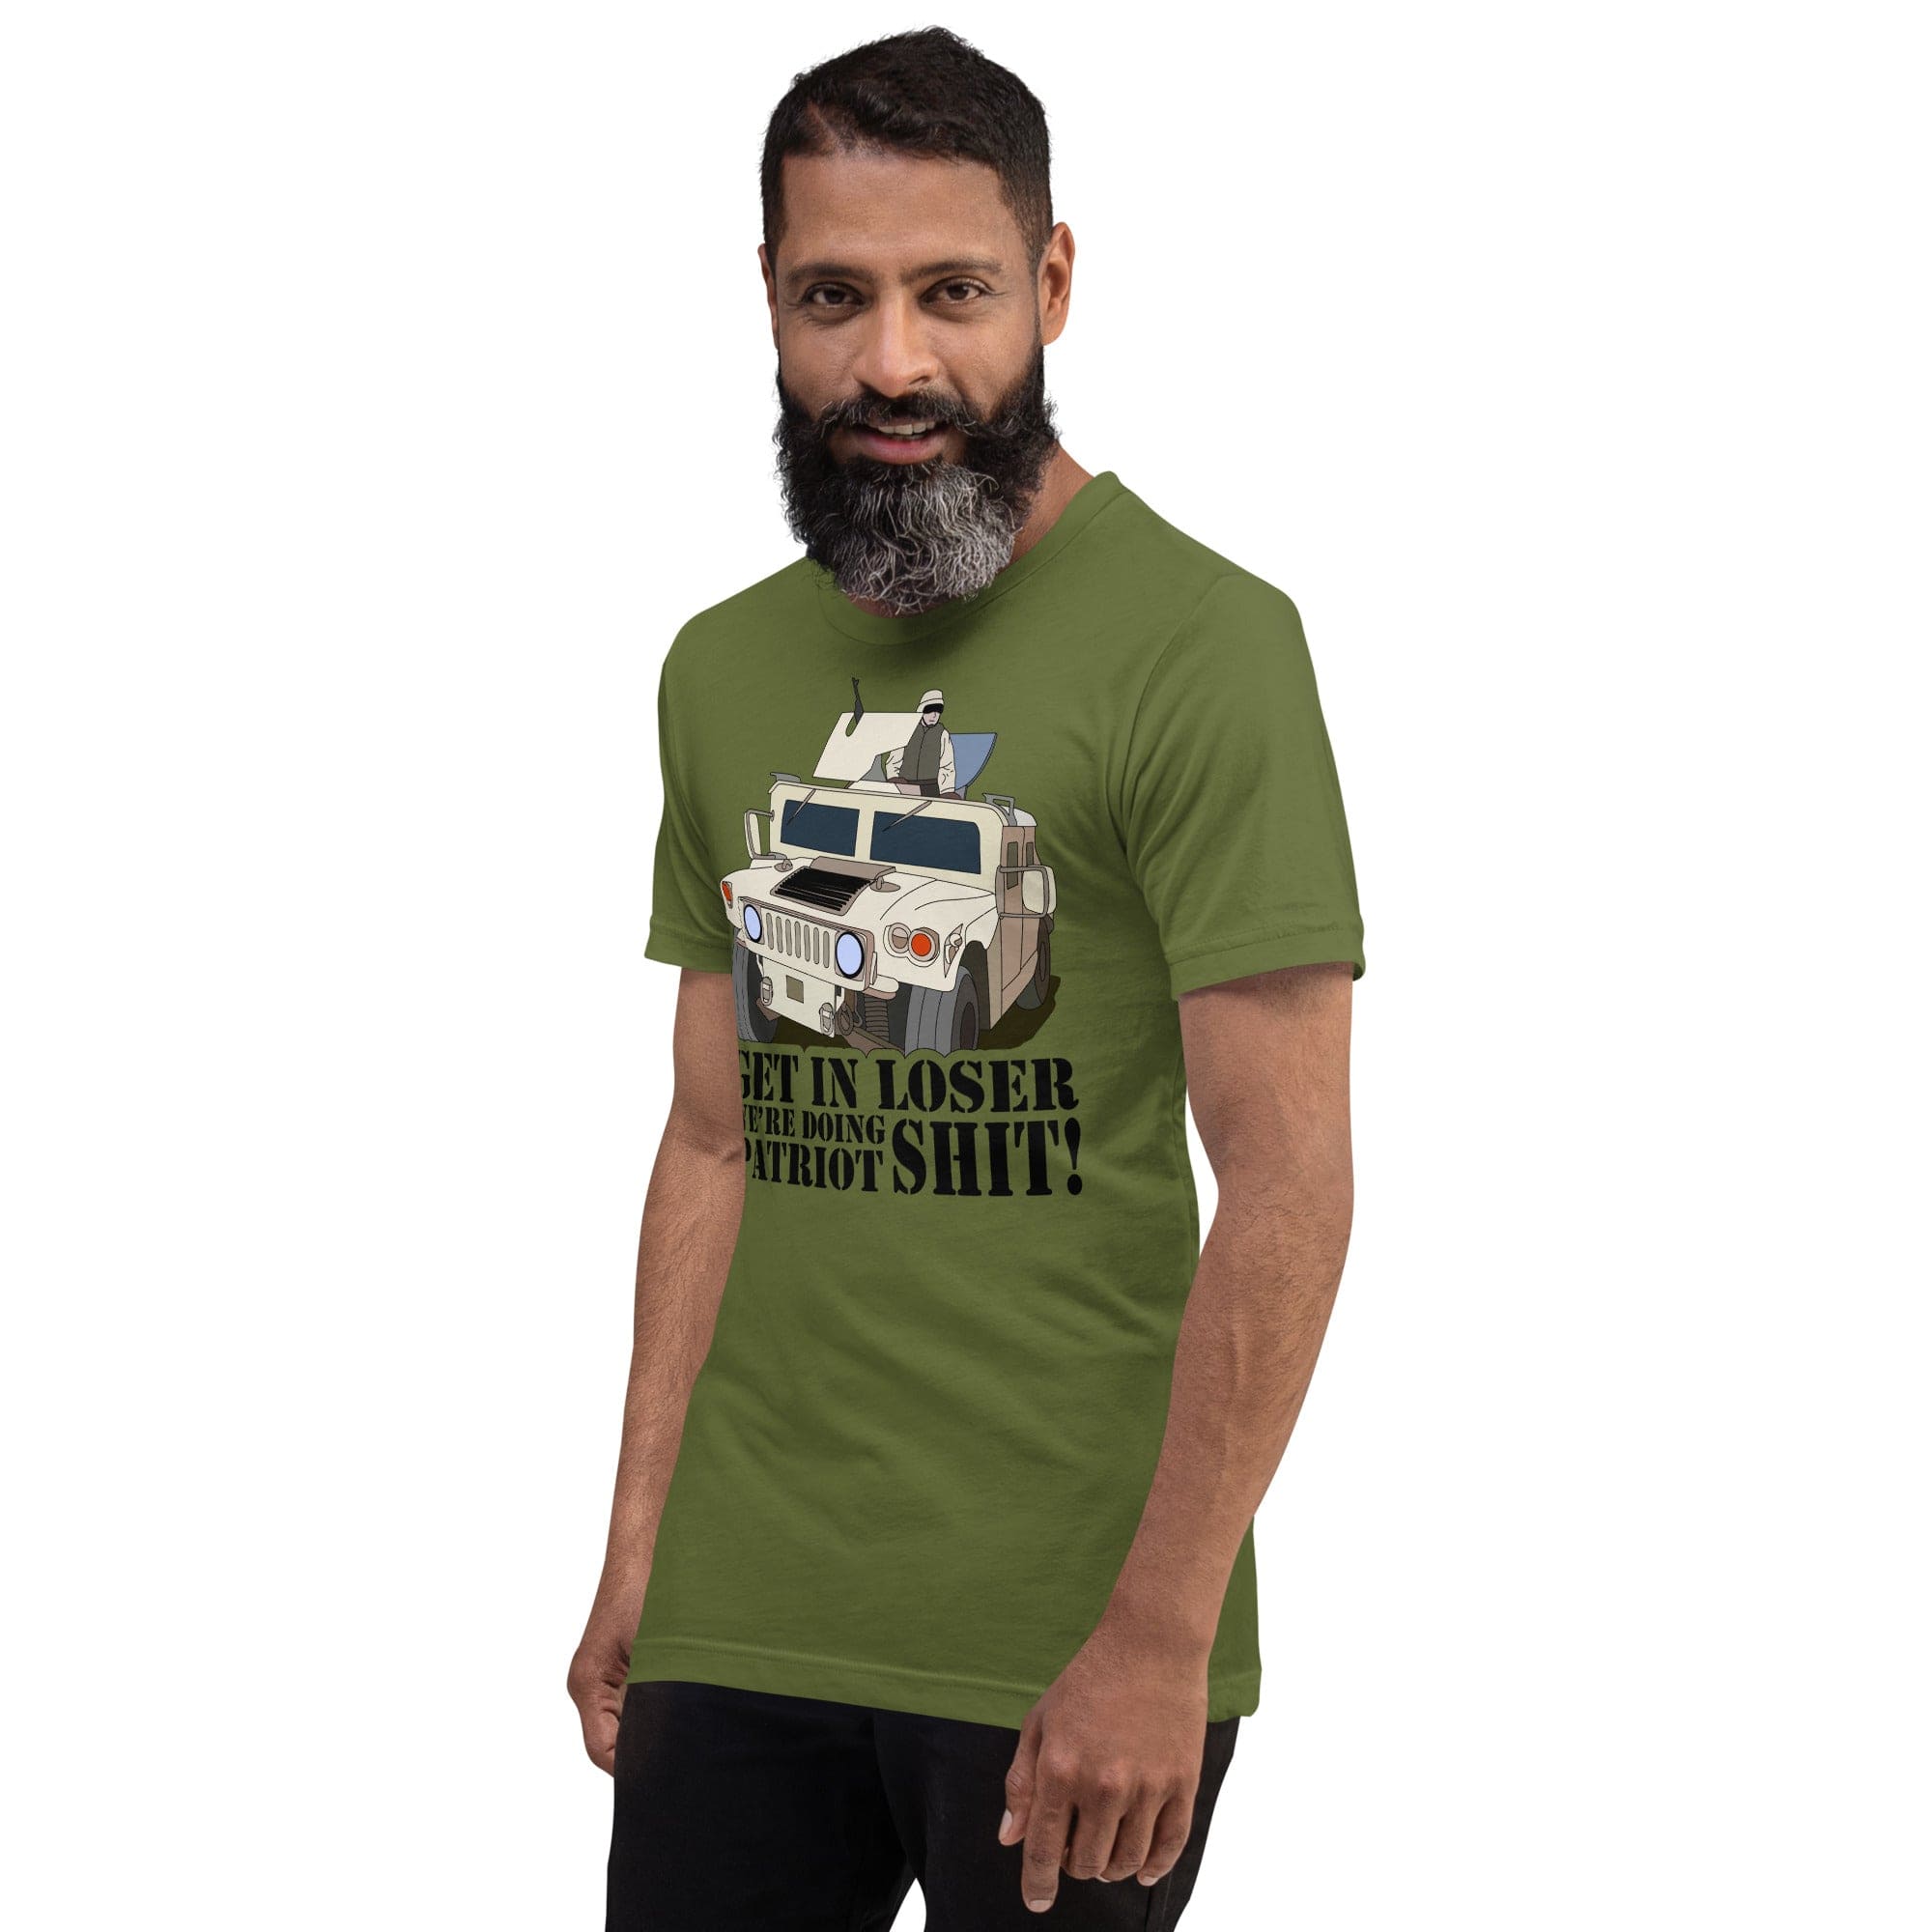 Tactical Gear Junkie Get in loser we're doing patriot shit Unisex t-shirt